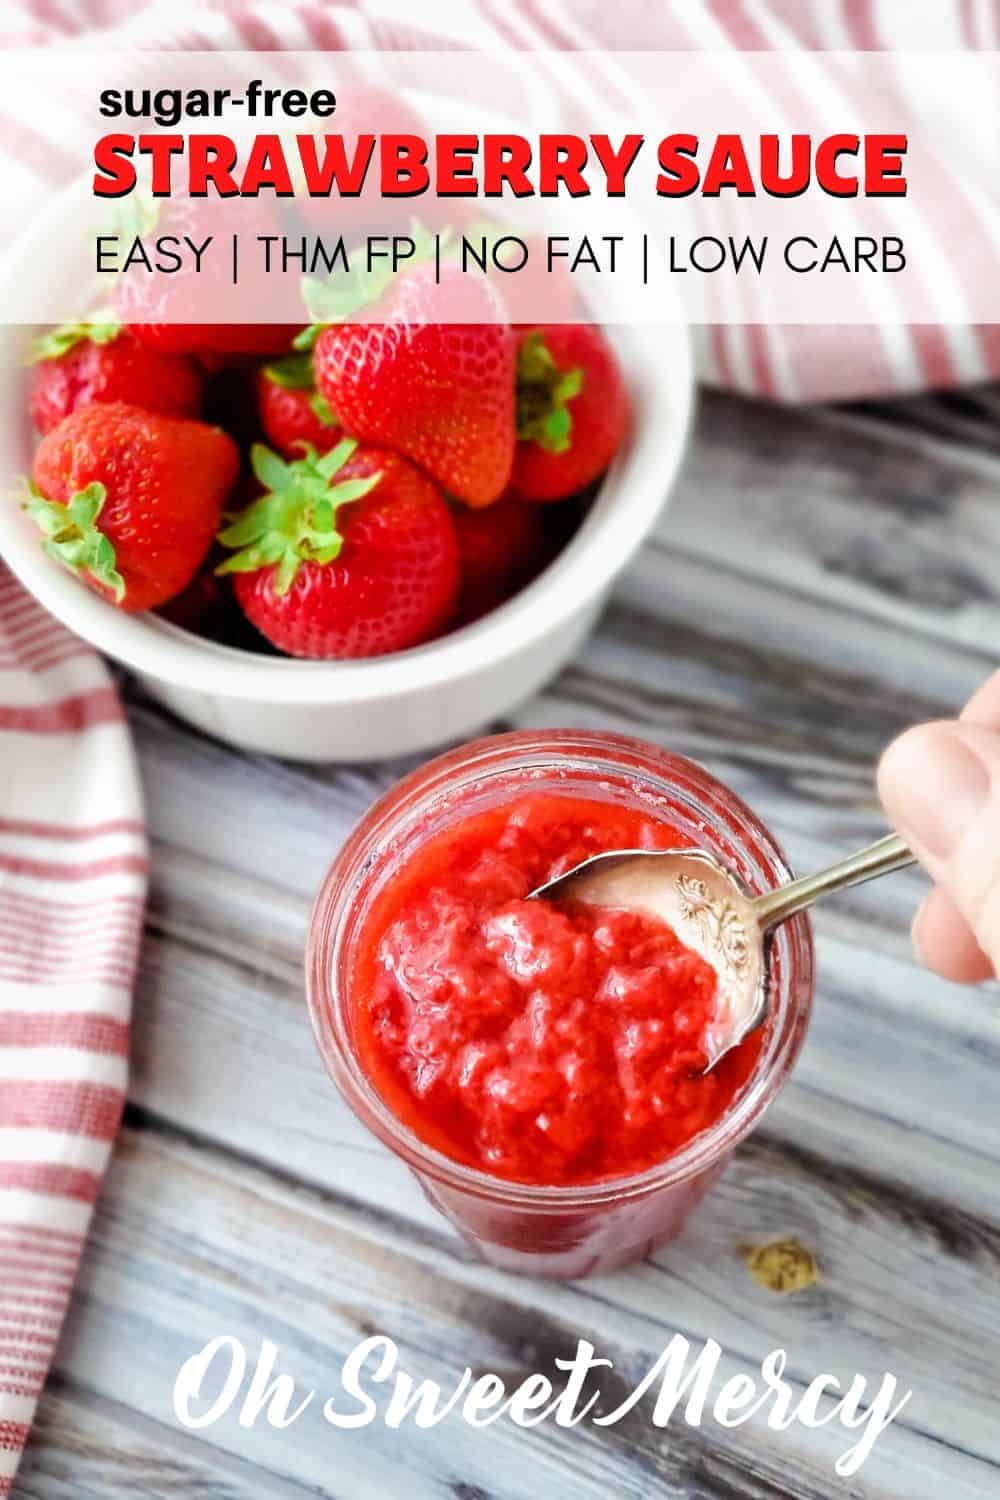 Top ice cream, yogurt, pancakes, and more with my easy sugar free strawberry sauce! It's a THM FP recipe, too. Each tablespoon has less than 1 gram net carbs and zero fat. All the sweet, juicy, summer strawberry goodness in a guilt-free sauce. #thm #sugarfree #fatfree #strawberries #icecreamtopping #lowcarb #keto #summerrecipes #berries #thmfp #fp #fuelpullrecipes @ohsweetmercy